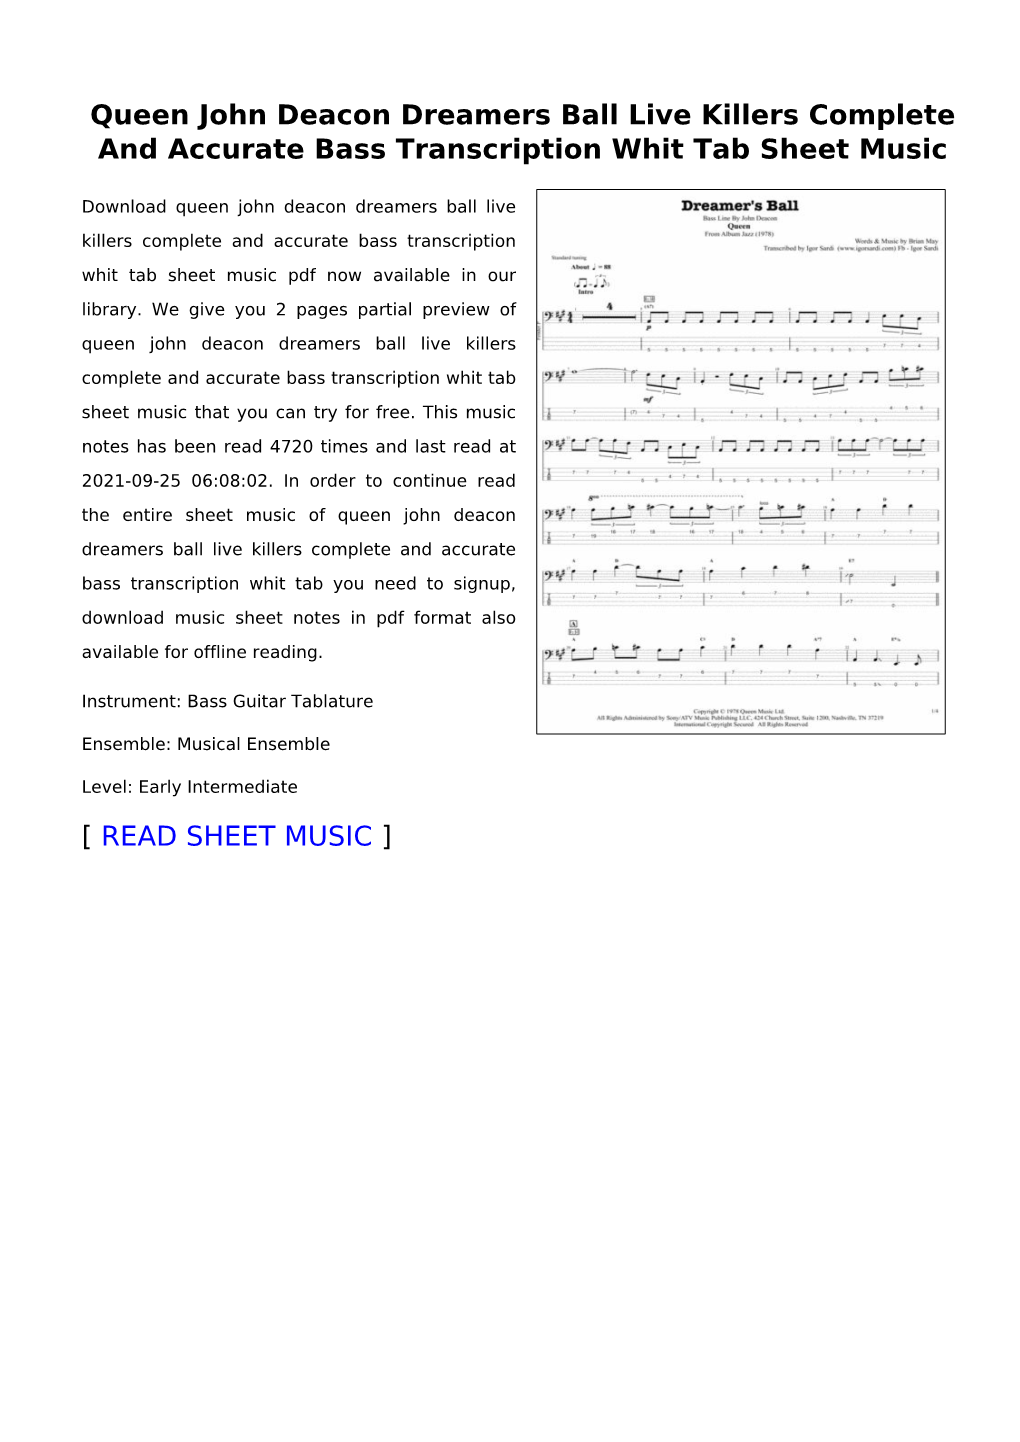 Queen John Deacon Dreamers Ball Live Killers Complete and Accurate Bass Transcription Whit Tab Sheet Music